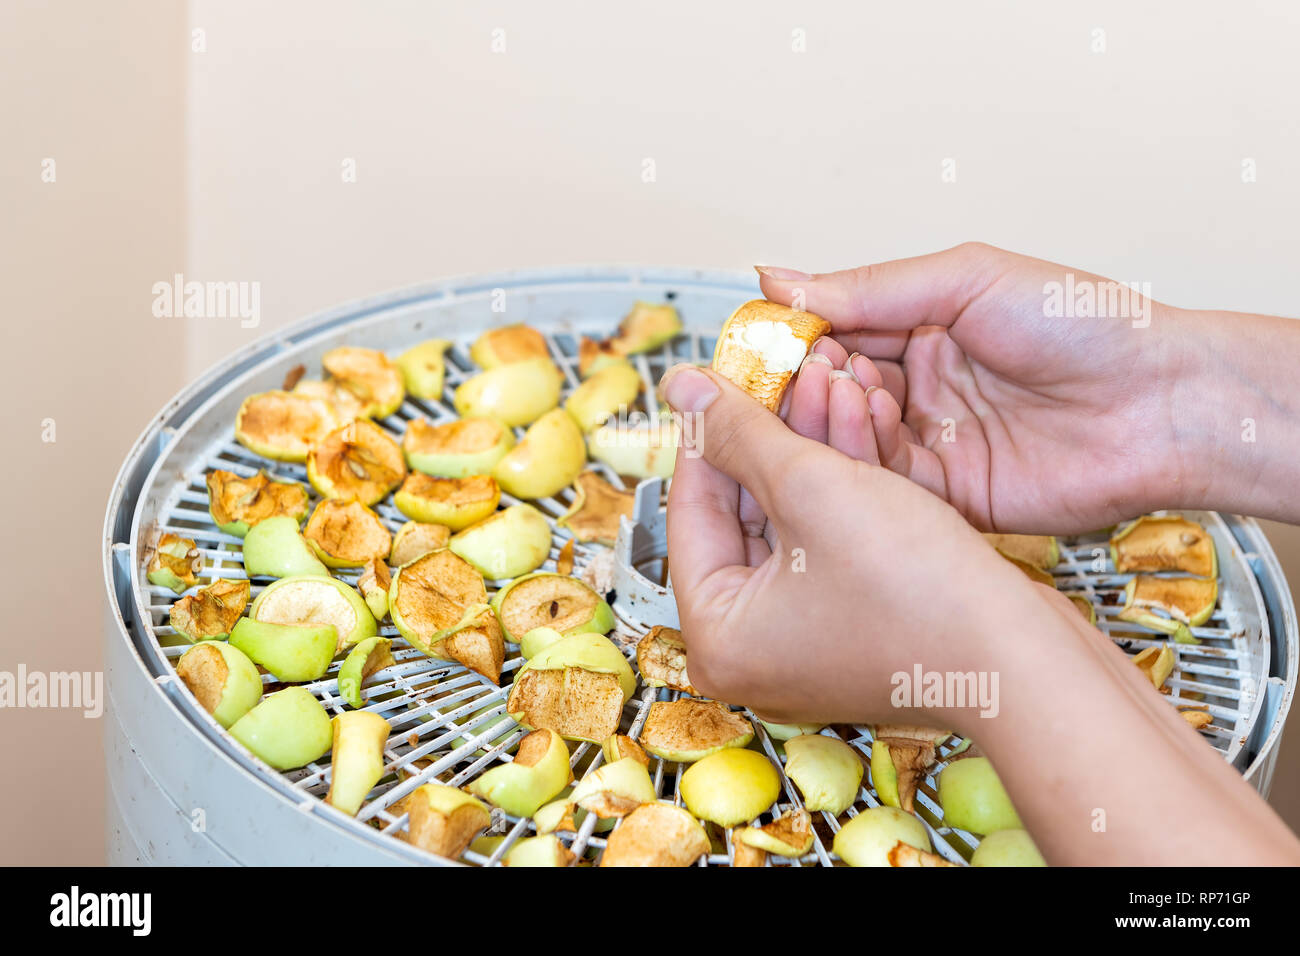 https://c8.alamy.com/comp/RP71GP/woman-hands-checking-for-dryness-in-dehydrator-green-yellow-golden-delicious-dry-dehydrated-homemade-pieces-apple-fruit-slices-on-circular-tray-RP71GP.jpg